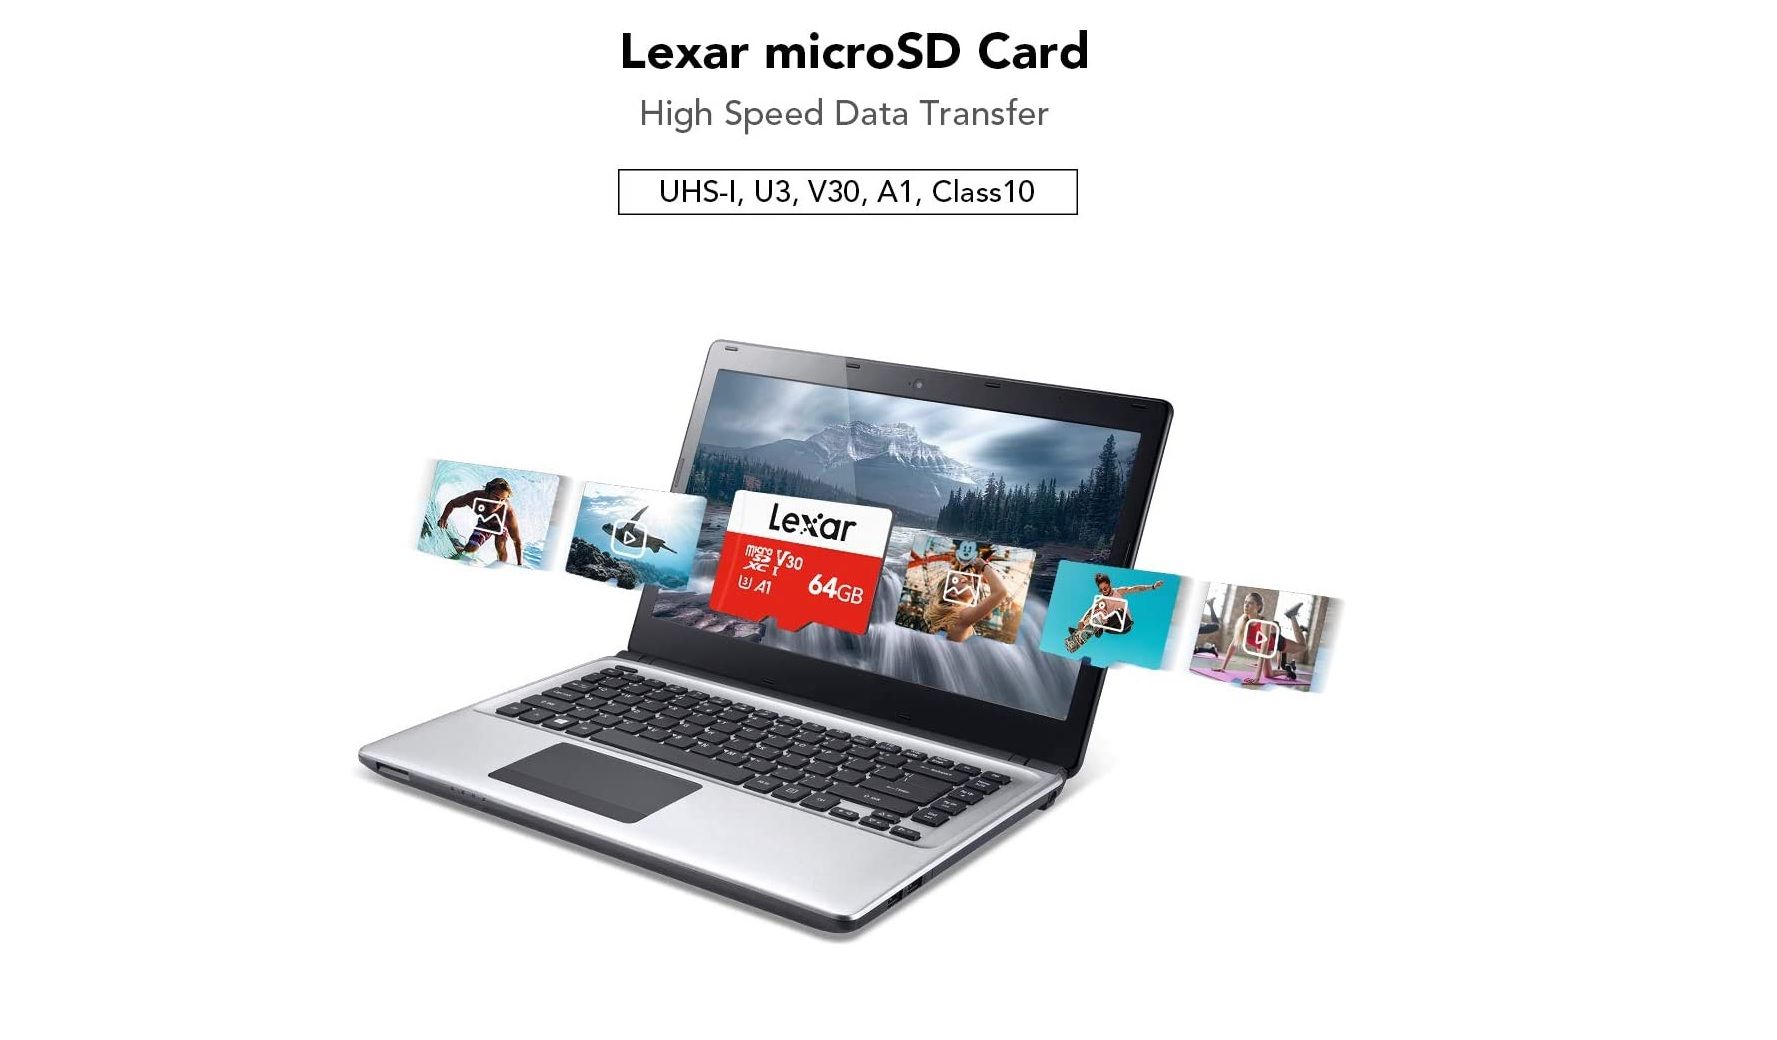 lexar 64gb microsd card with a laptop and images in the background